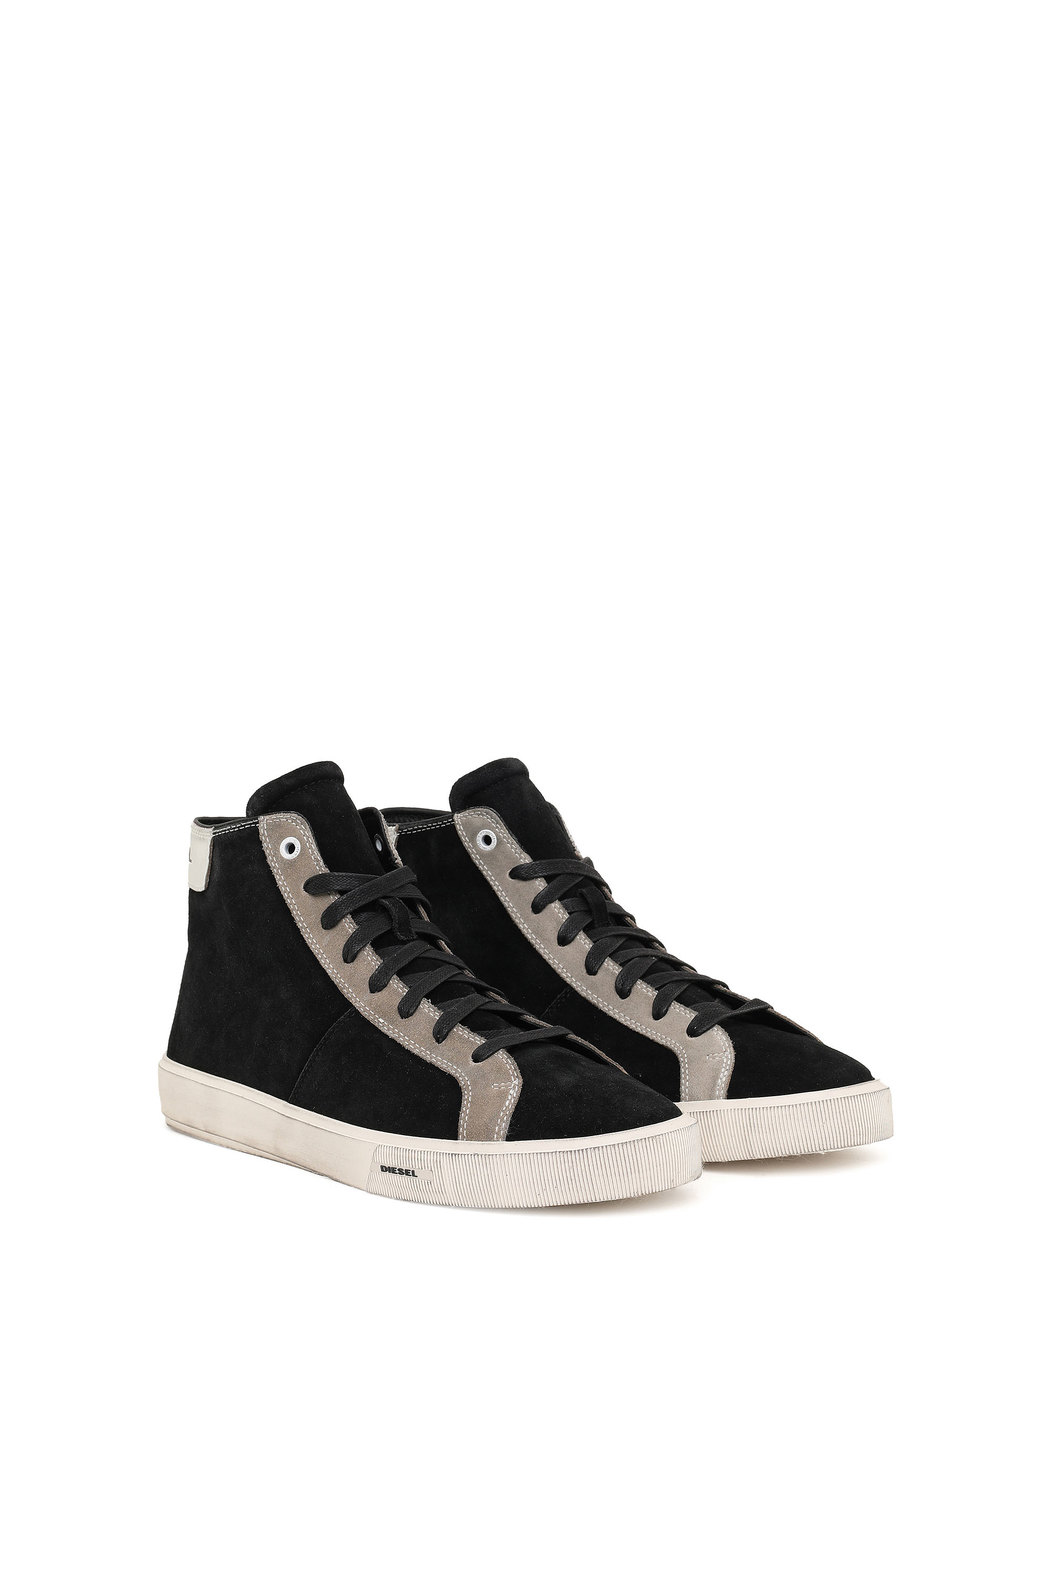 High-top sneakers in treated suede